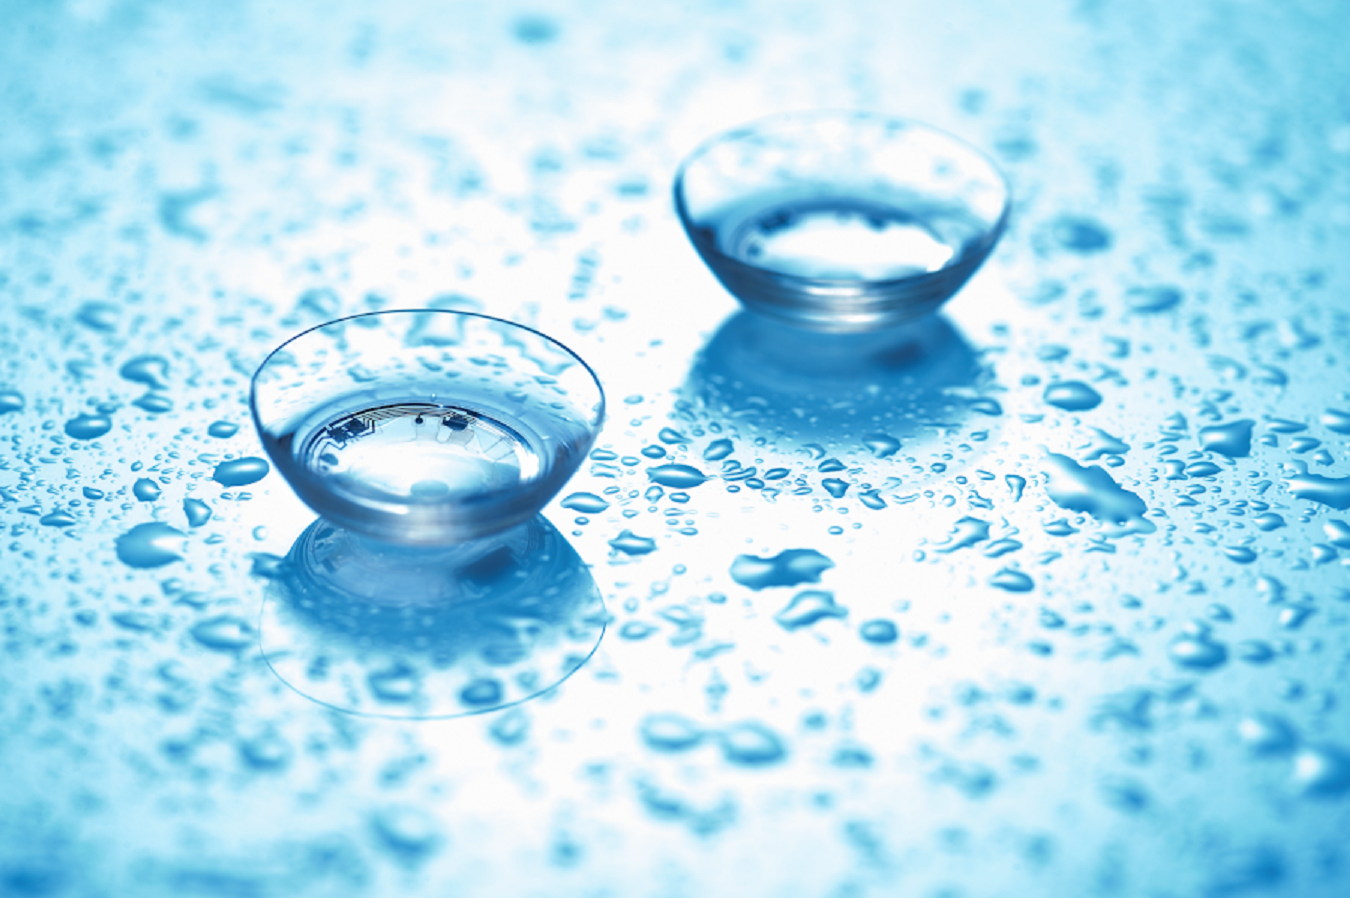 smart contact lens being developed by verily